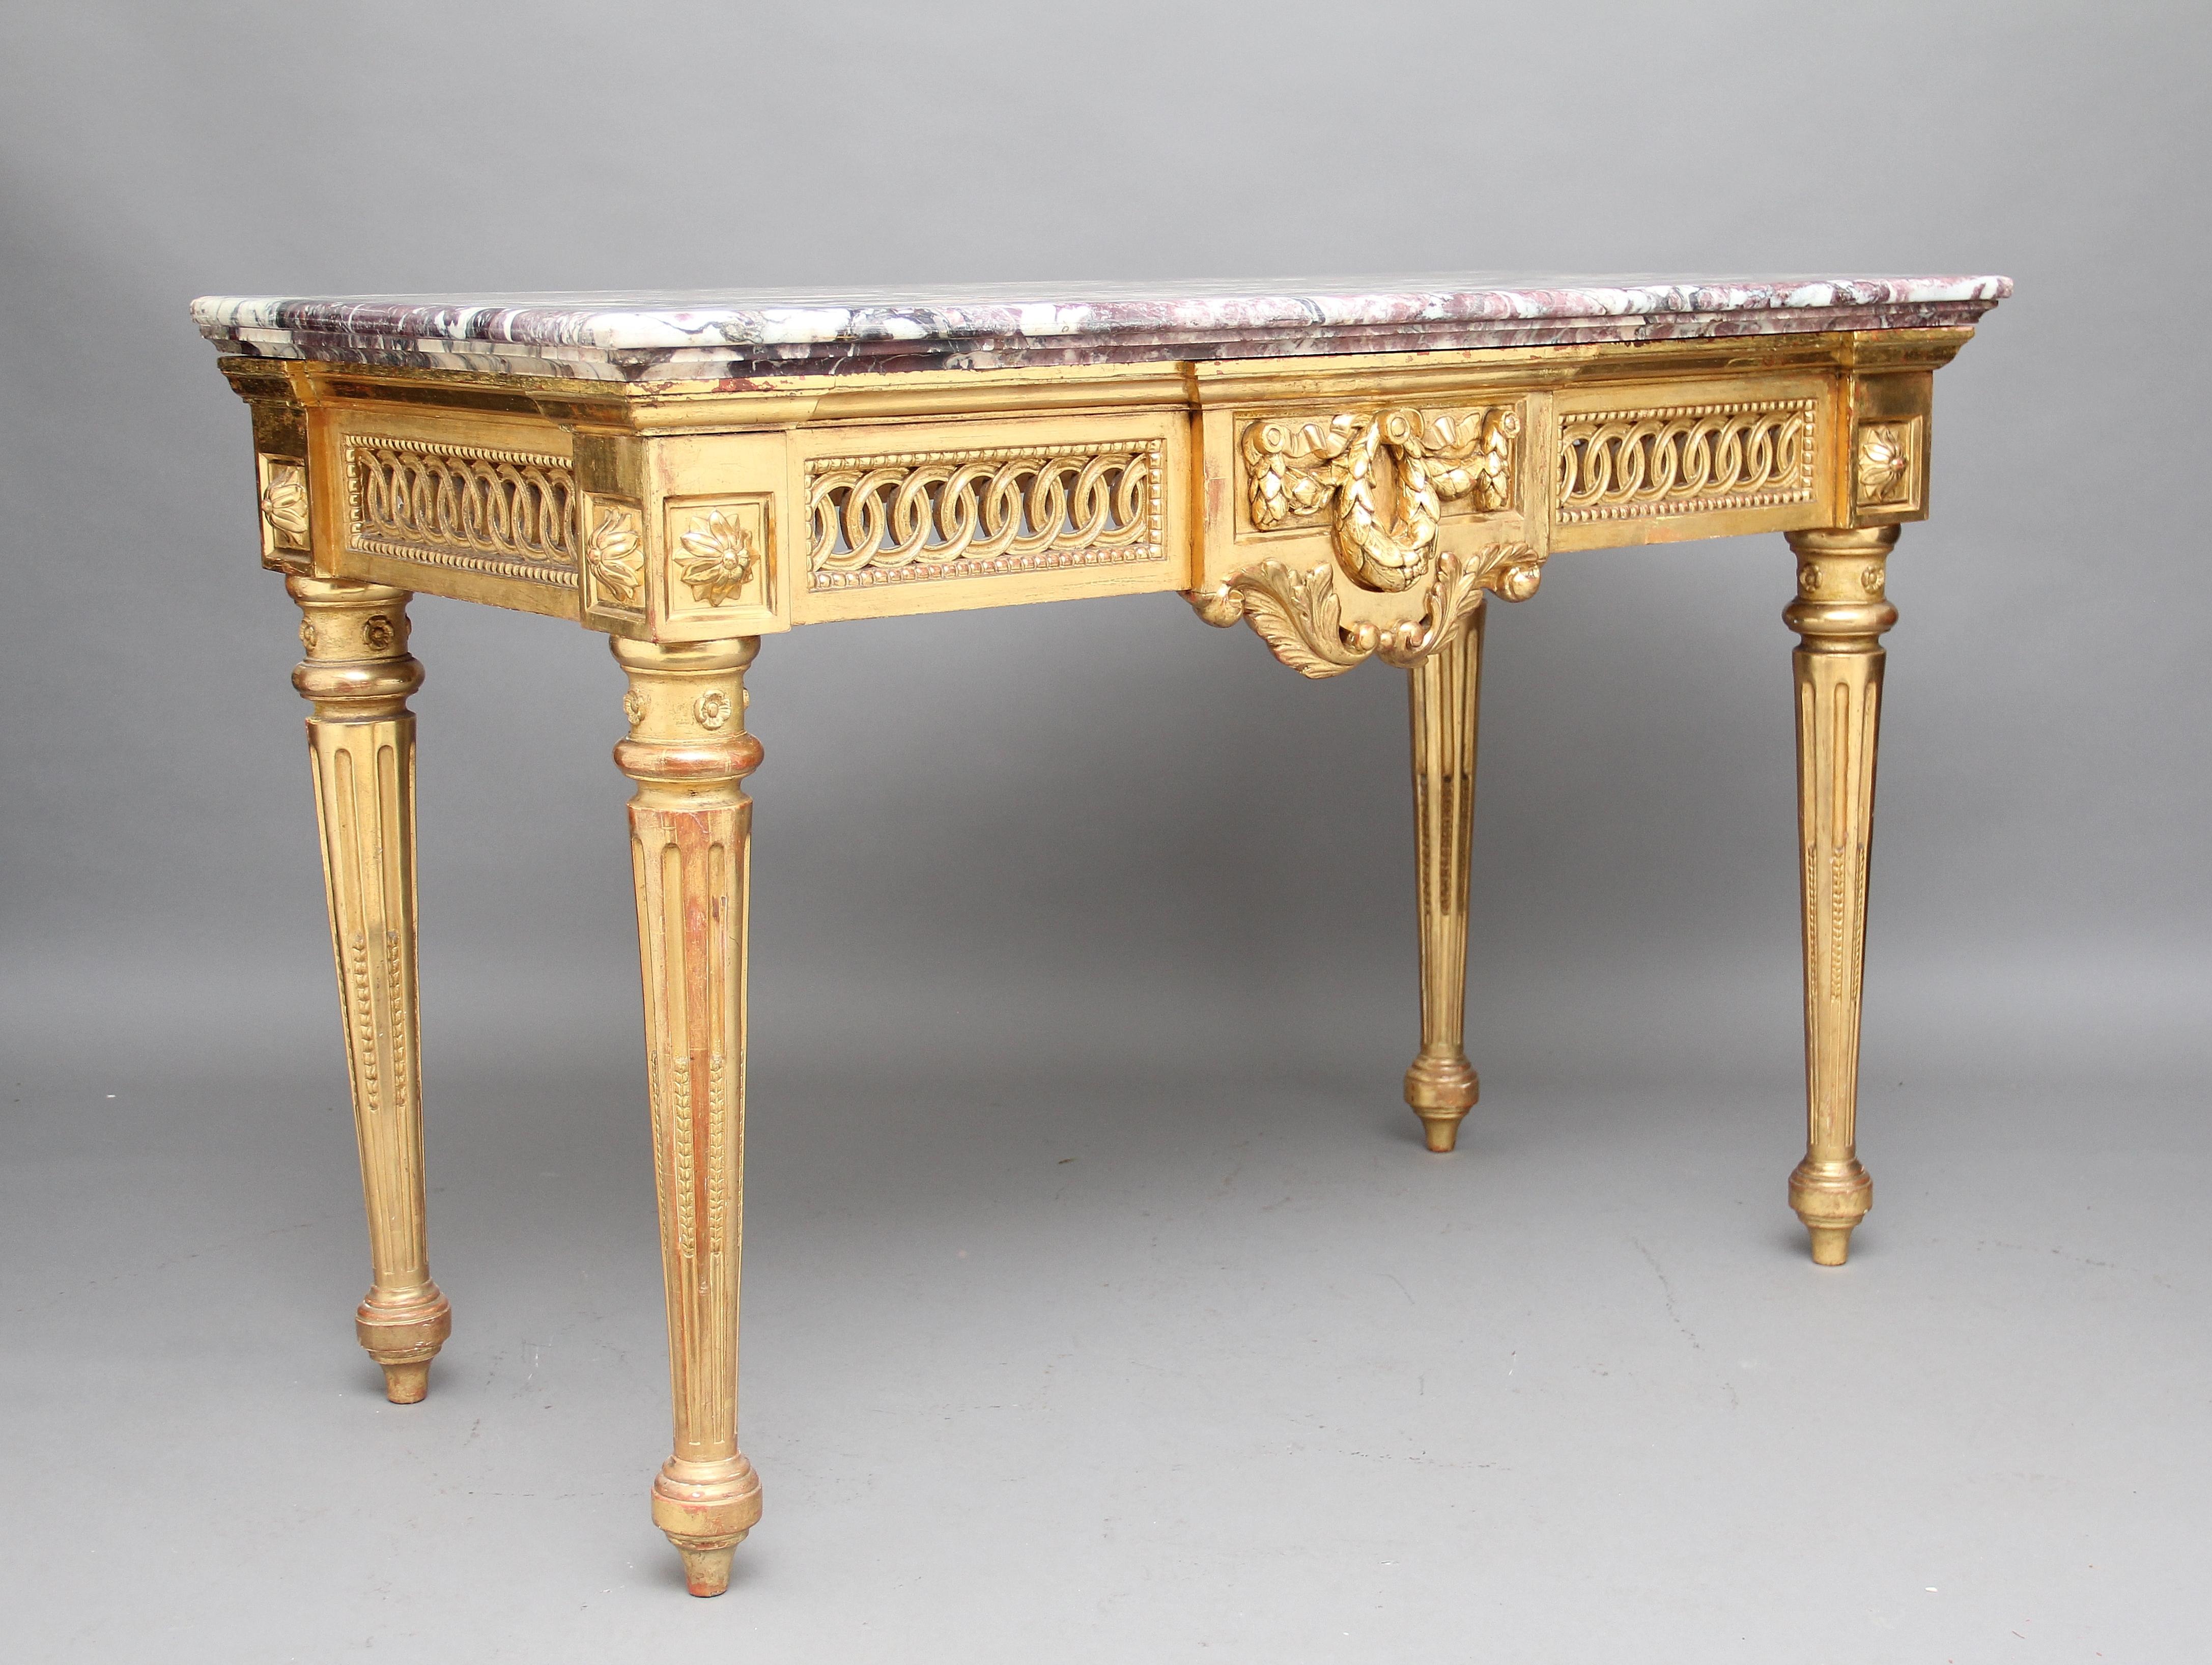 A fabulous 19th century French carved and gilt consultable with a wonderful colored marble top having a lovely molded edge, standing on four turned and fluted legs, at the top of the legs is an inset panel with a carved patrae, there are pierced